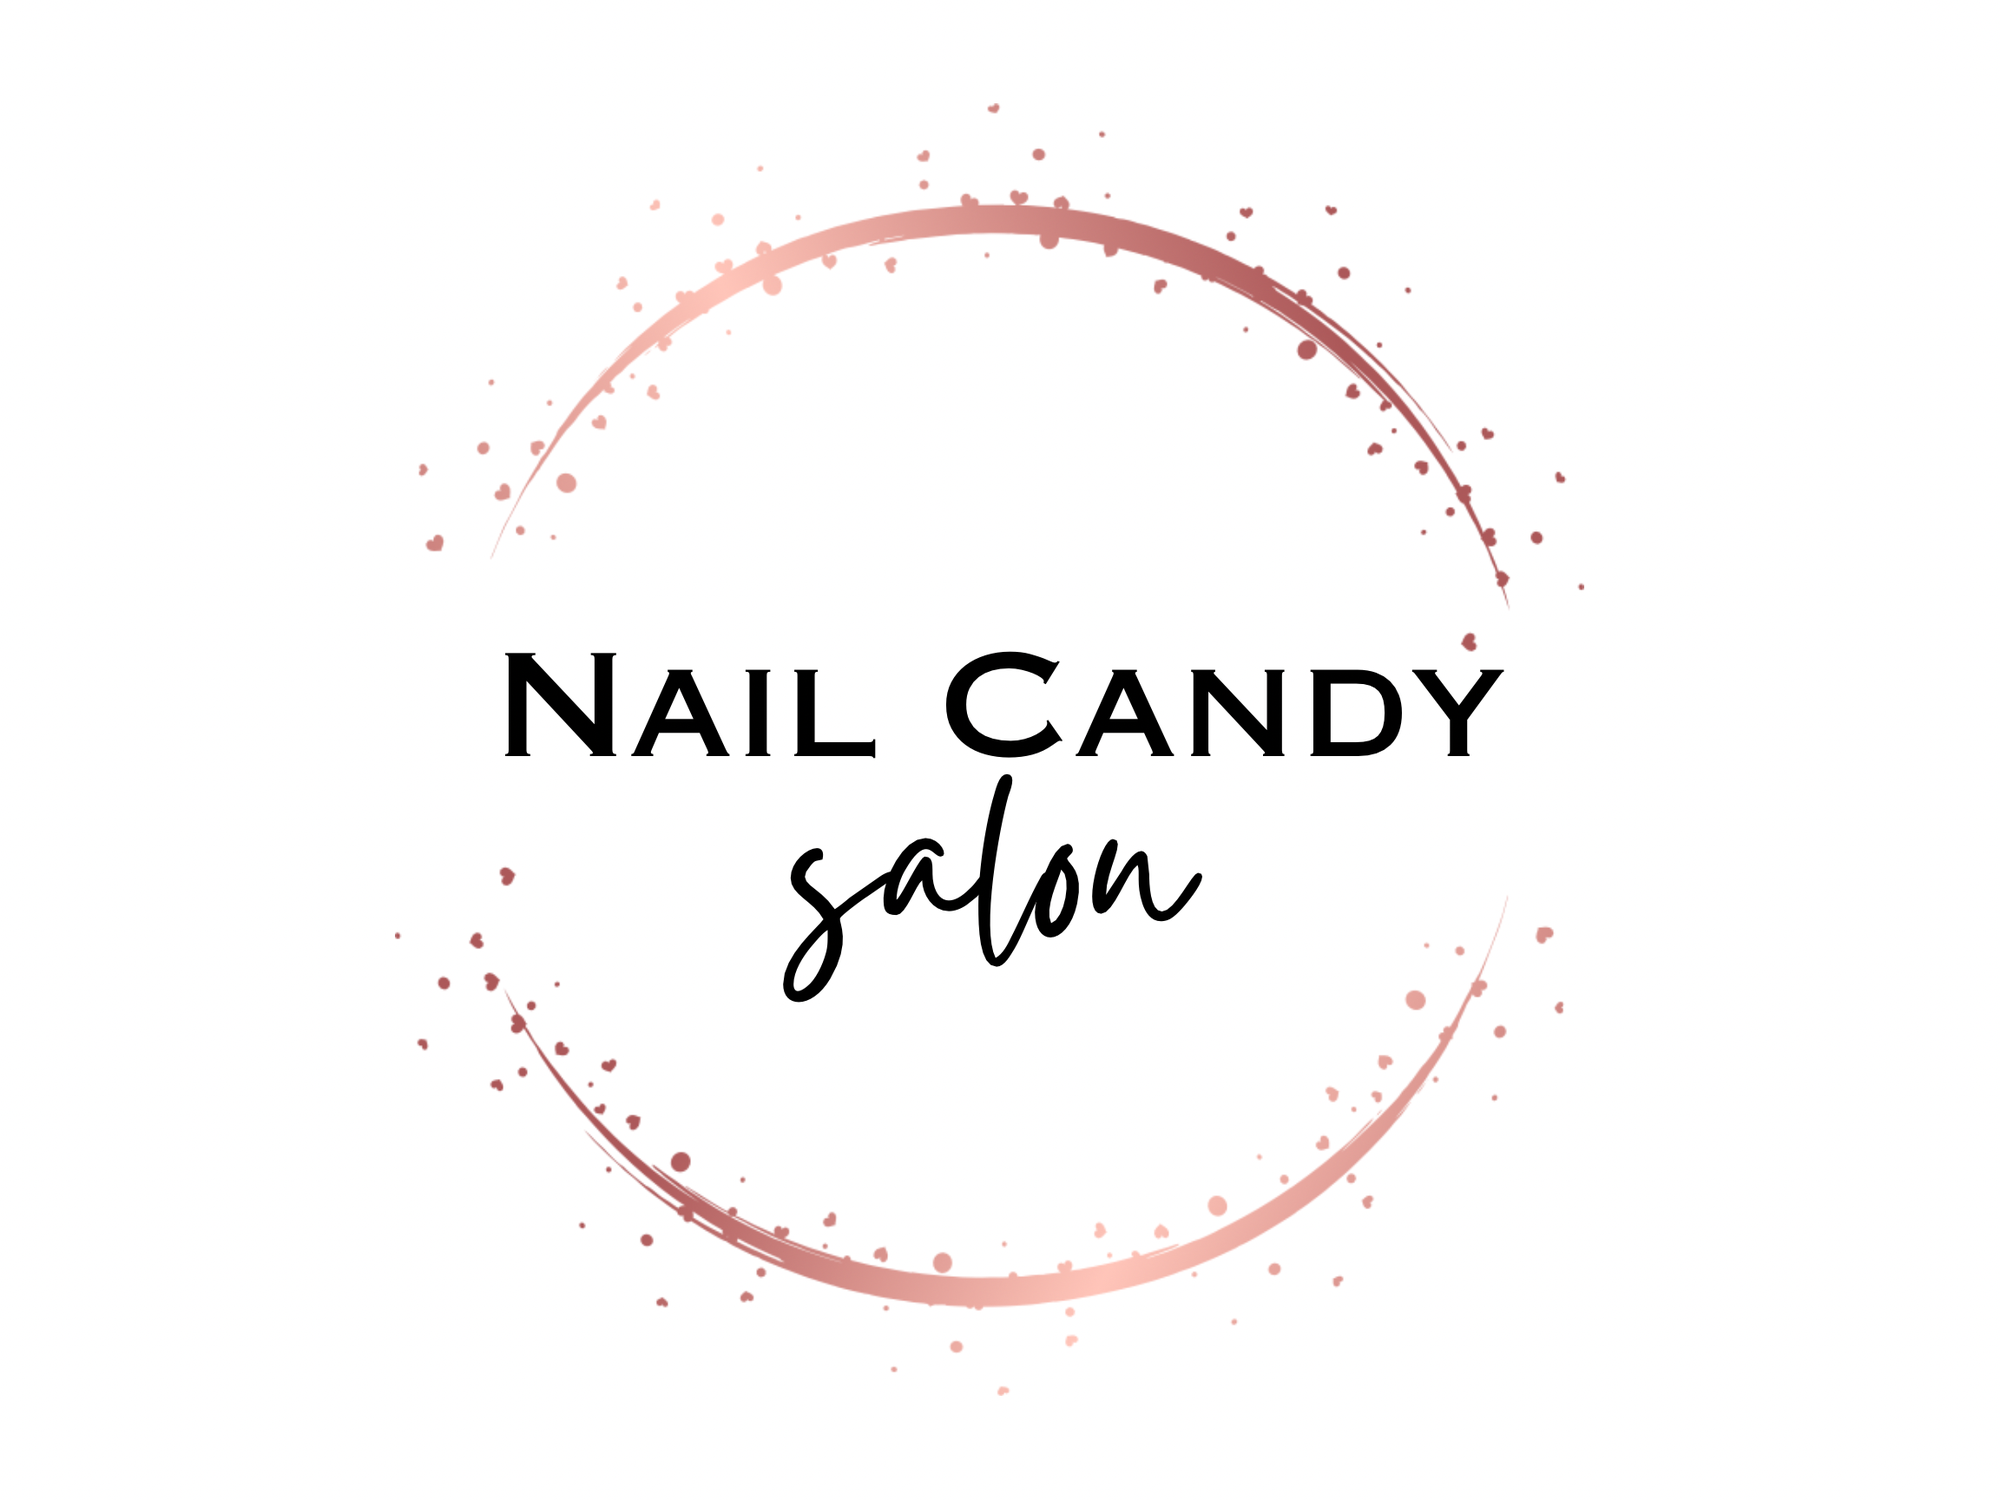 1. "10 Fun Nail Design Videos to Try at Home" - wide 6